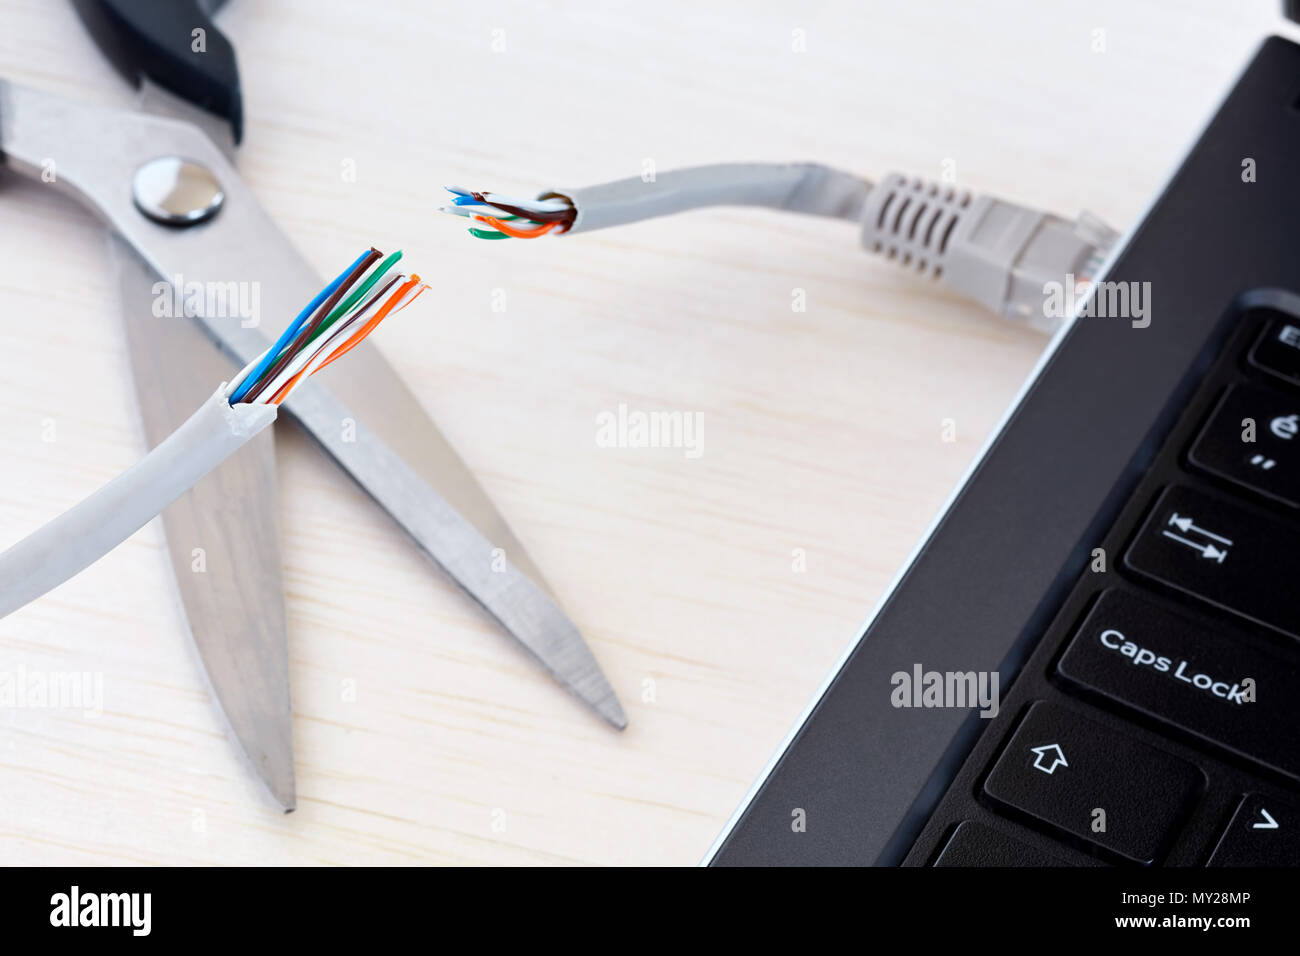 Internet cable connected to a laptop computer cut by a scissors. Concept of internet ban, cencorship and interruption. Stock Photo